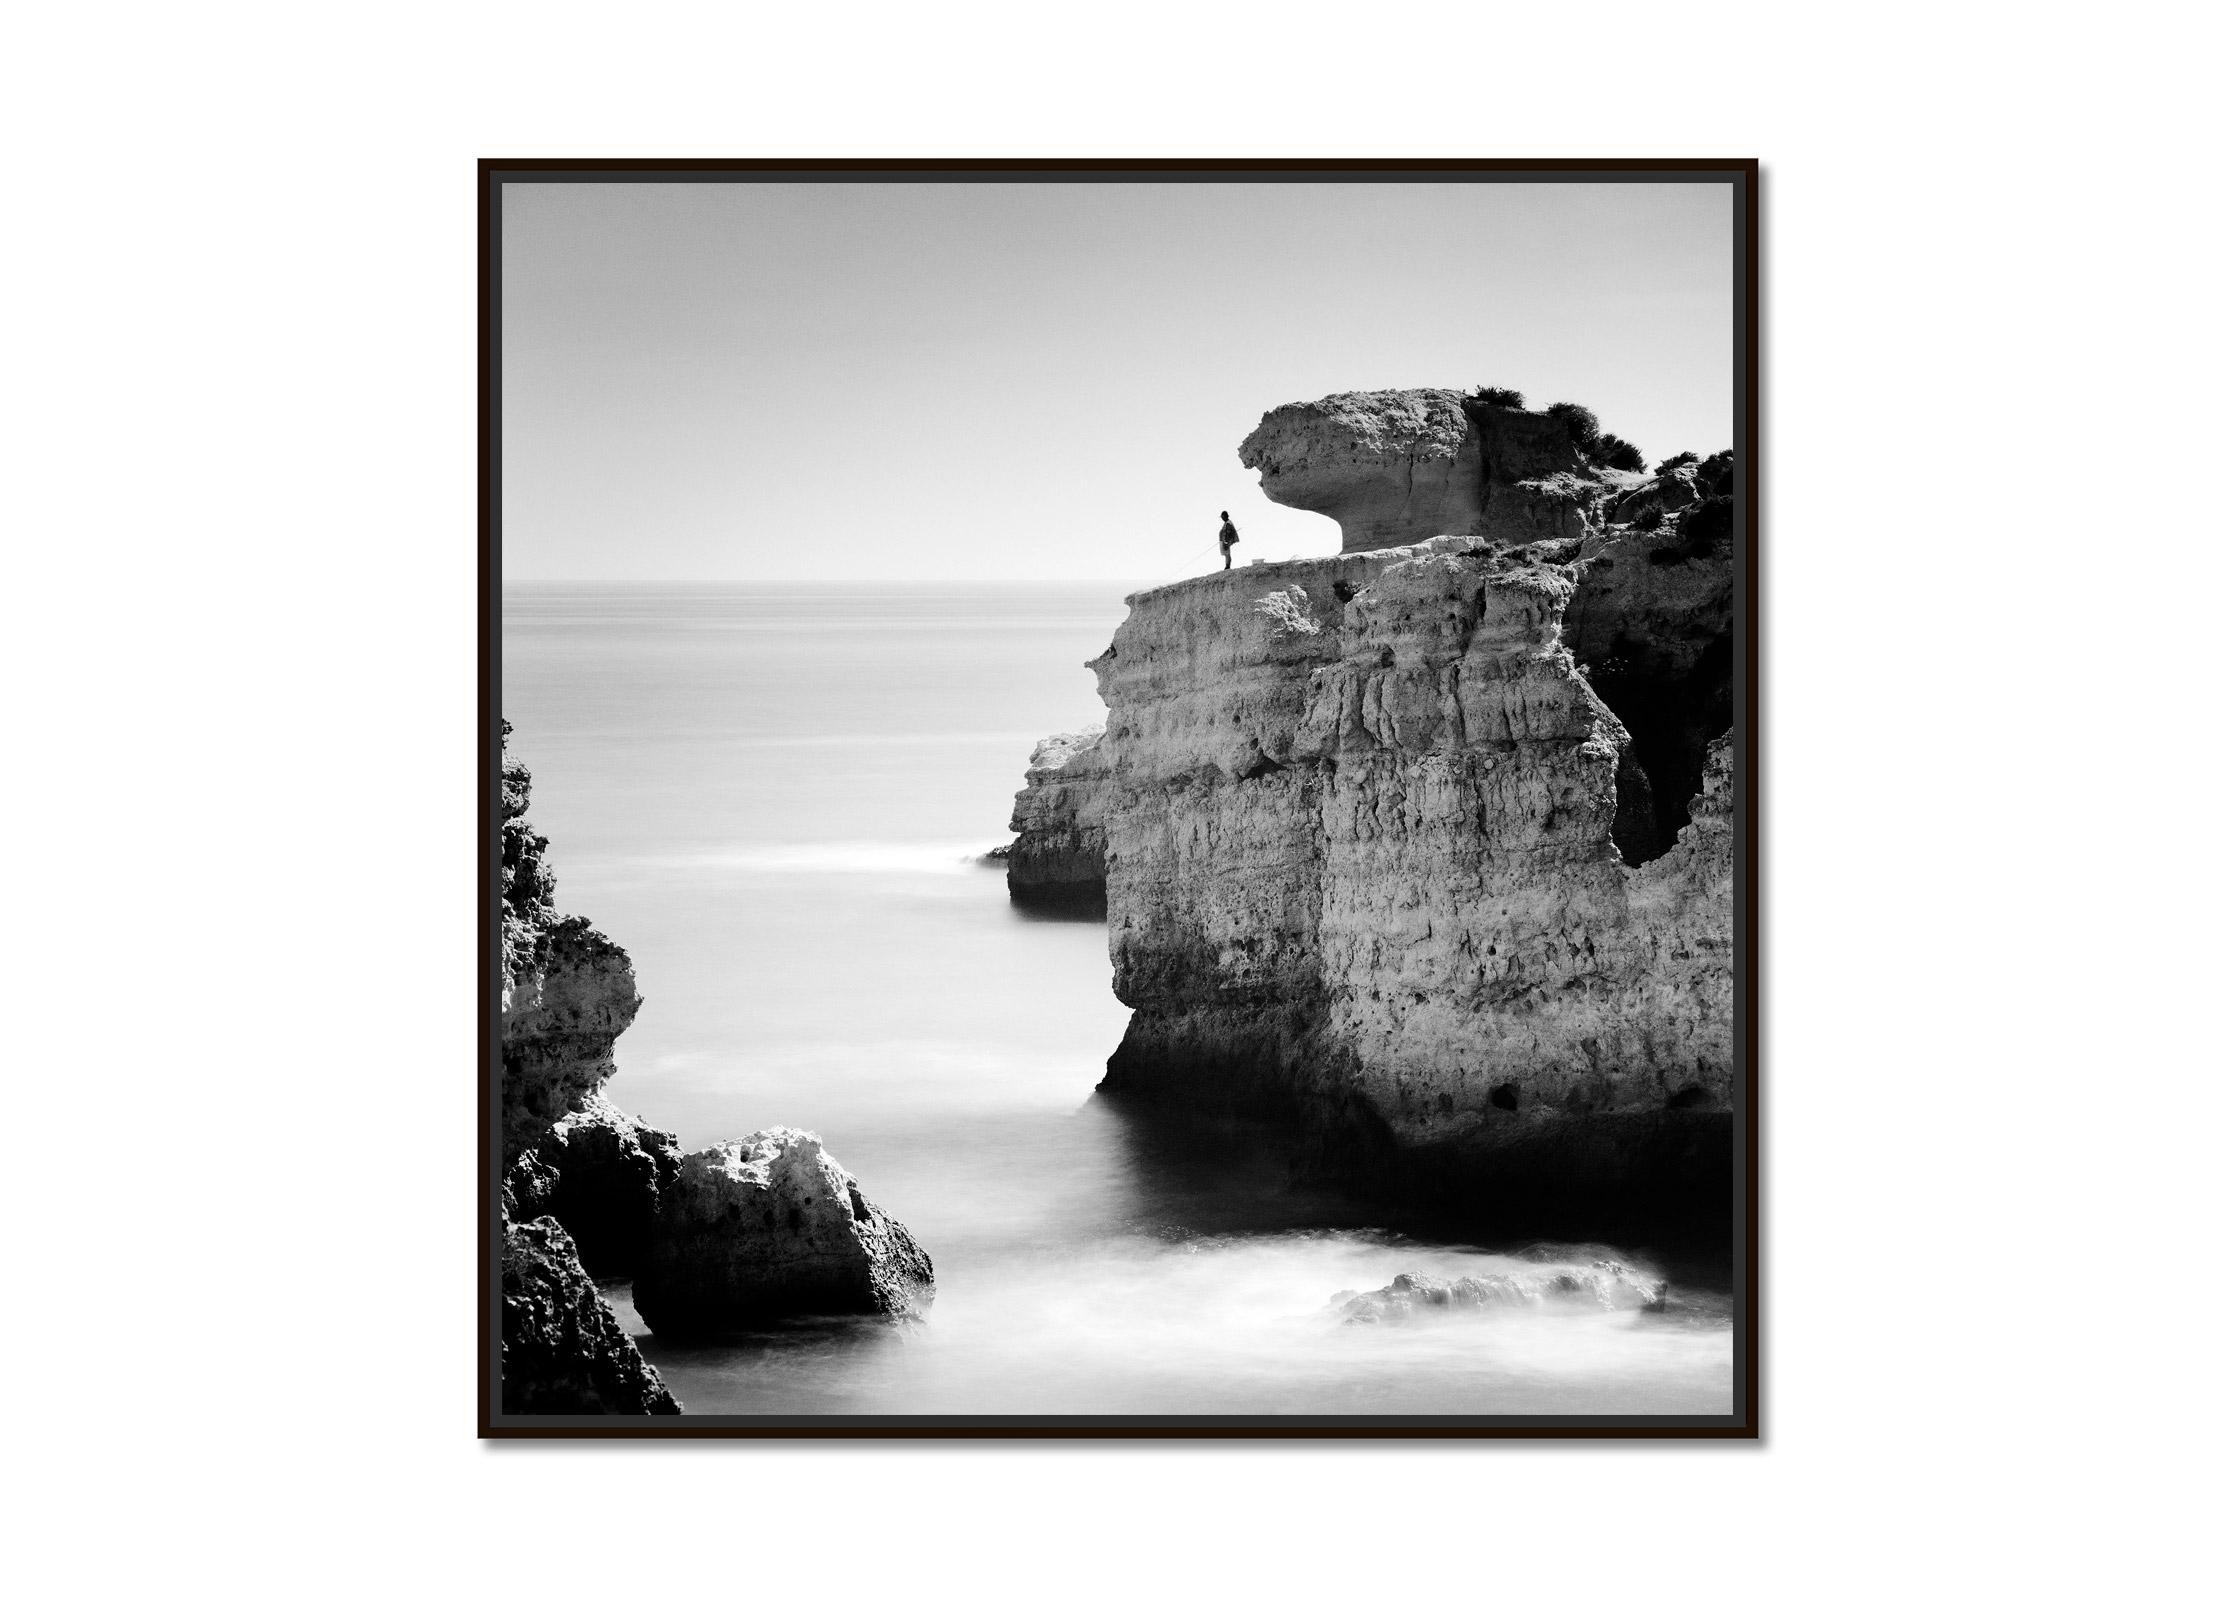 Rock Fishing, Shoreline, Cliffs, Portugal, black and white landscape photography - Photograph by Gerald Berghammer